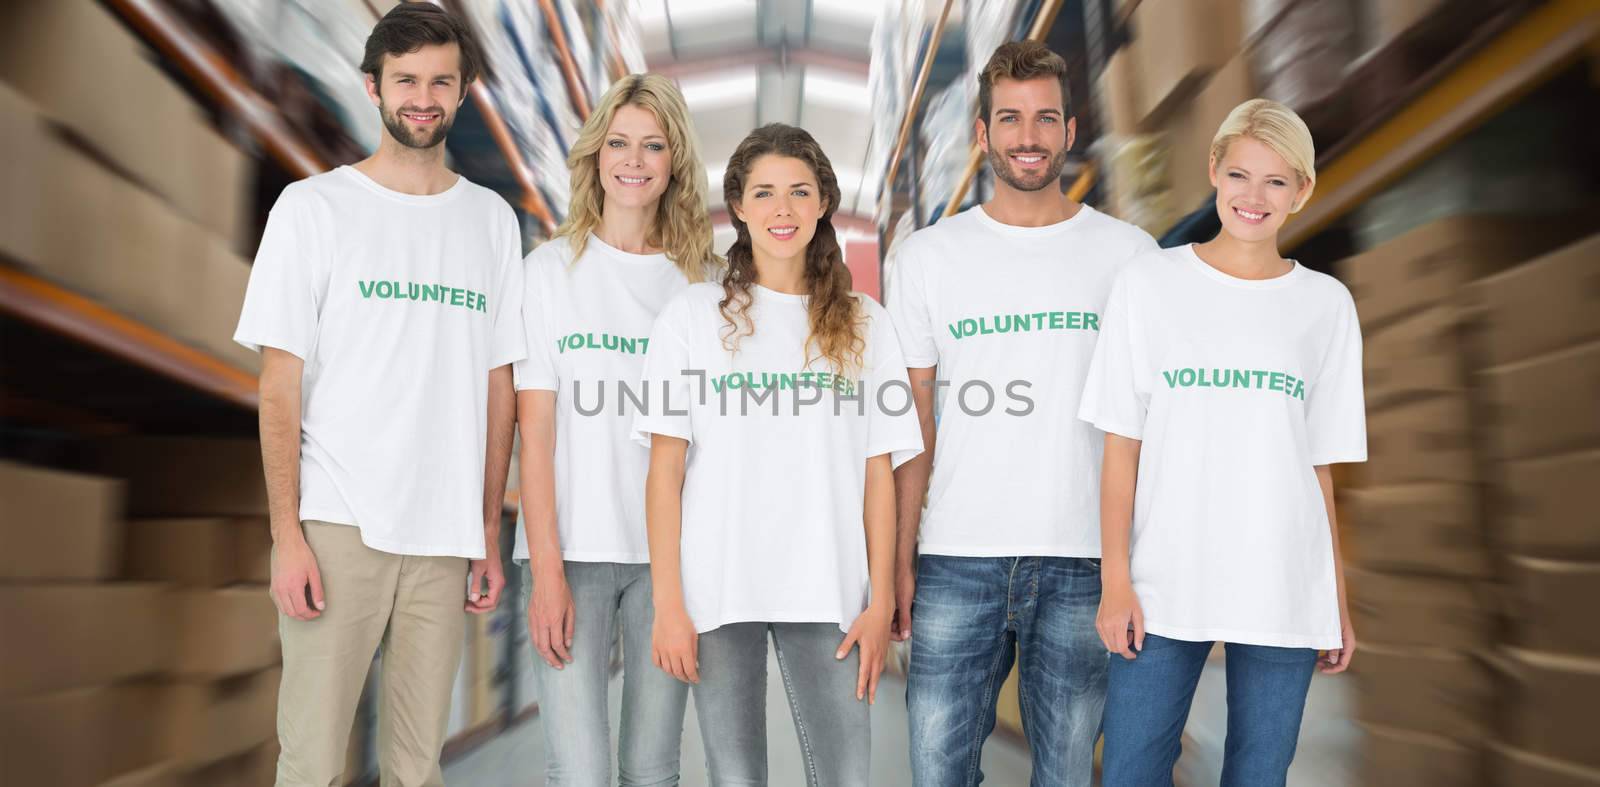 Group portrait of happy volunteers against shelves with boxes in warehouse